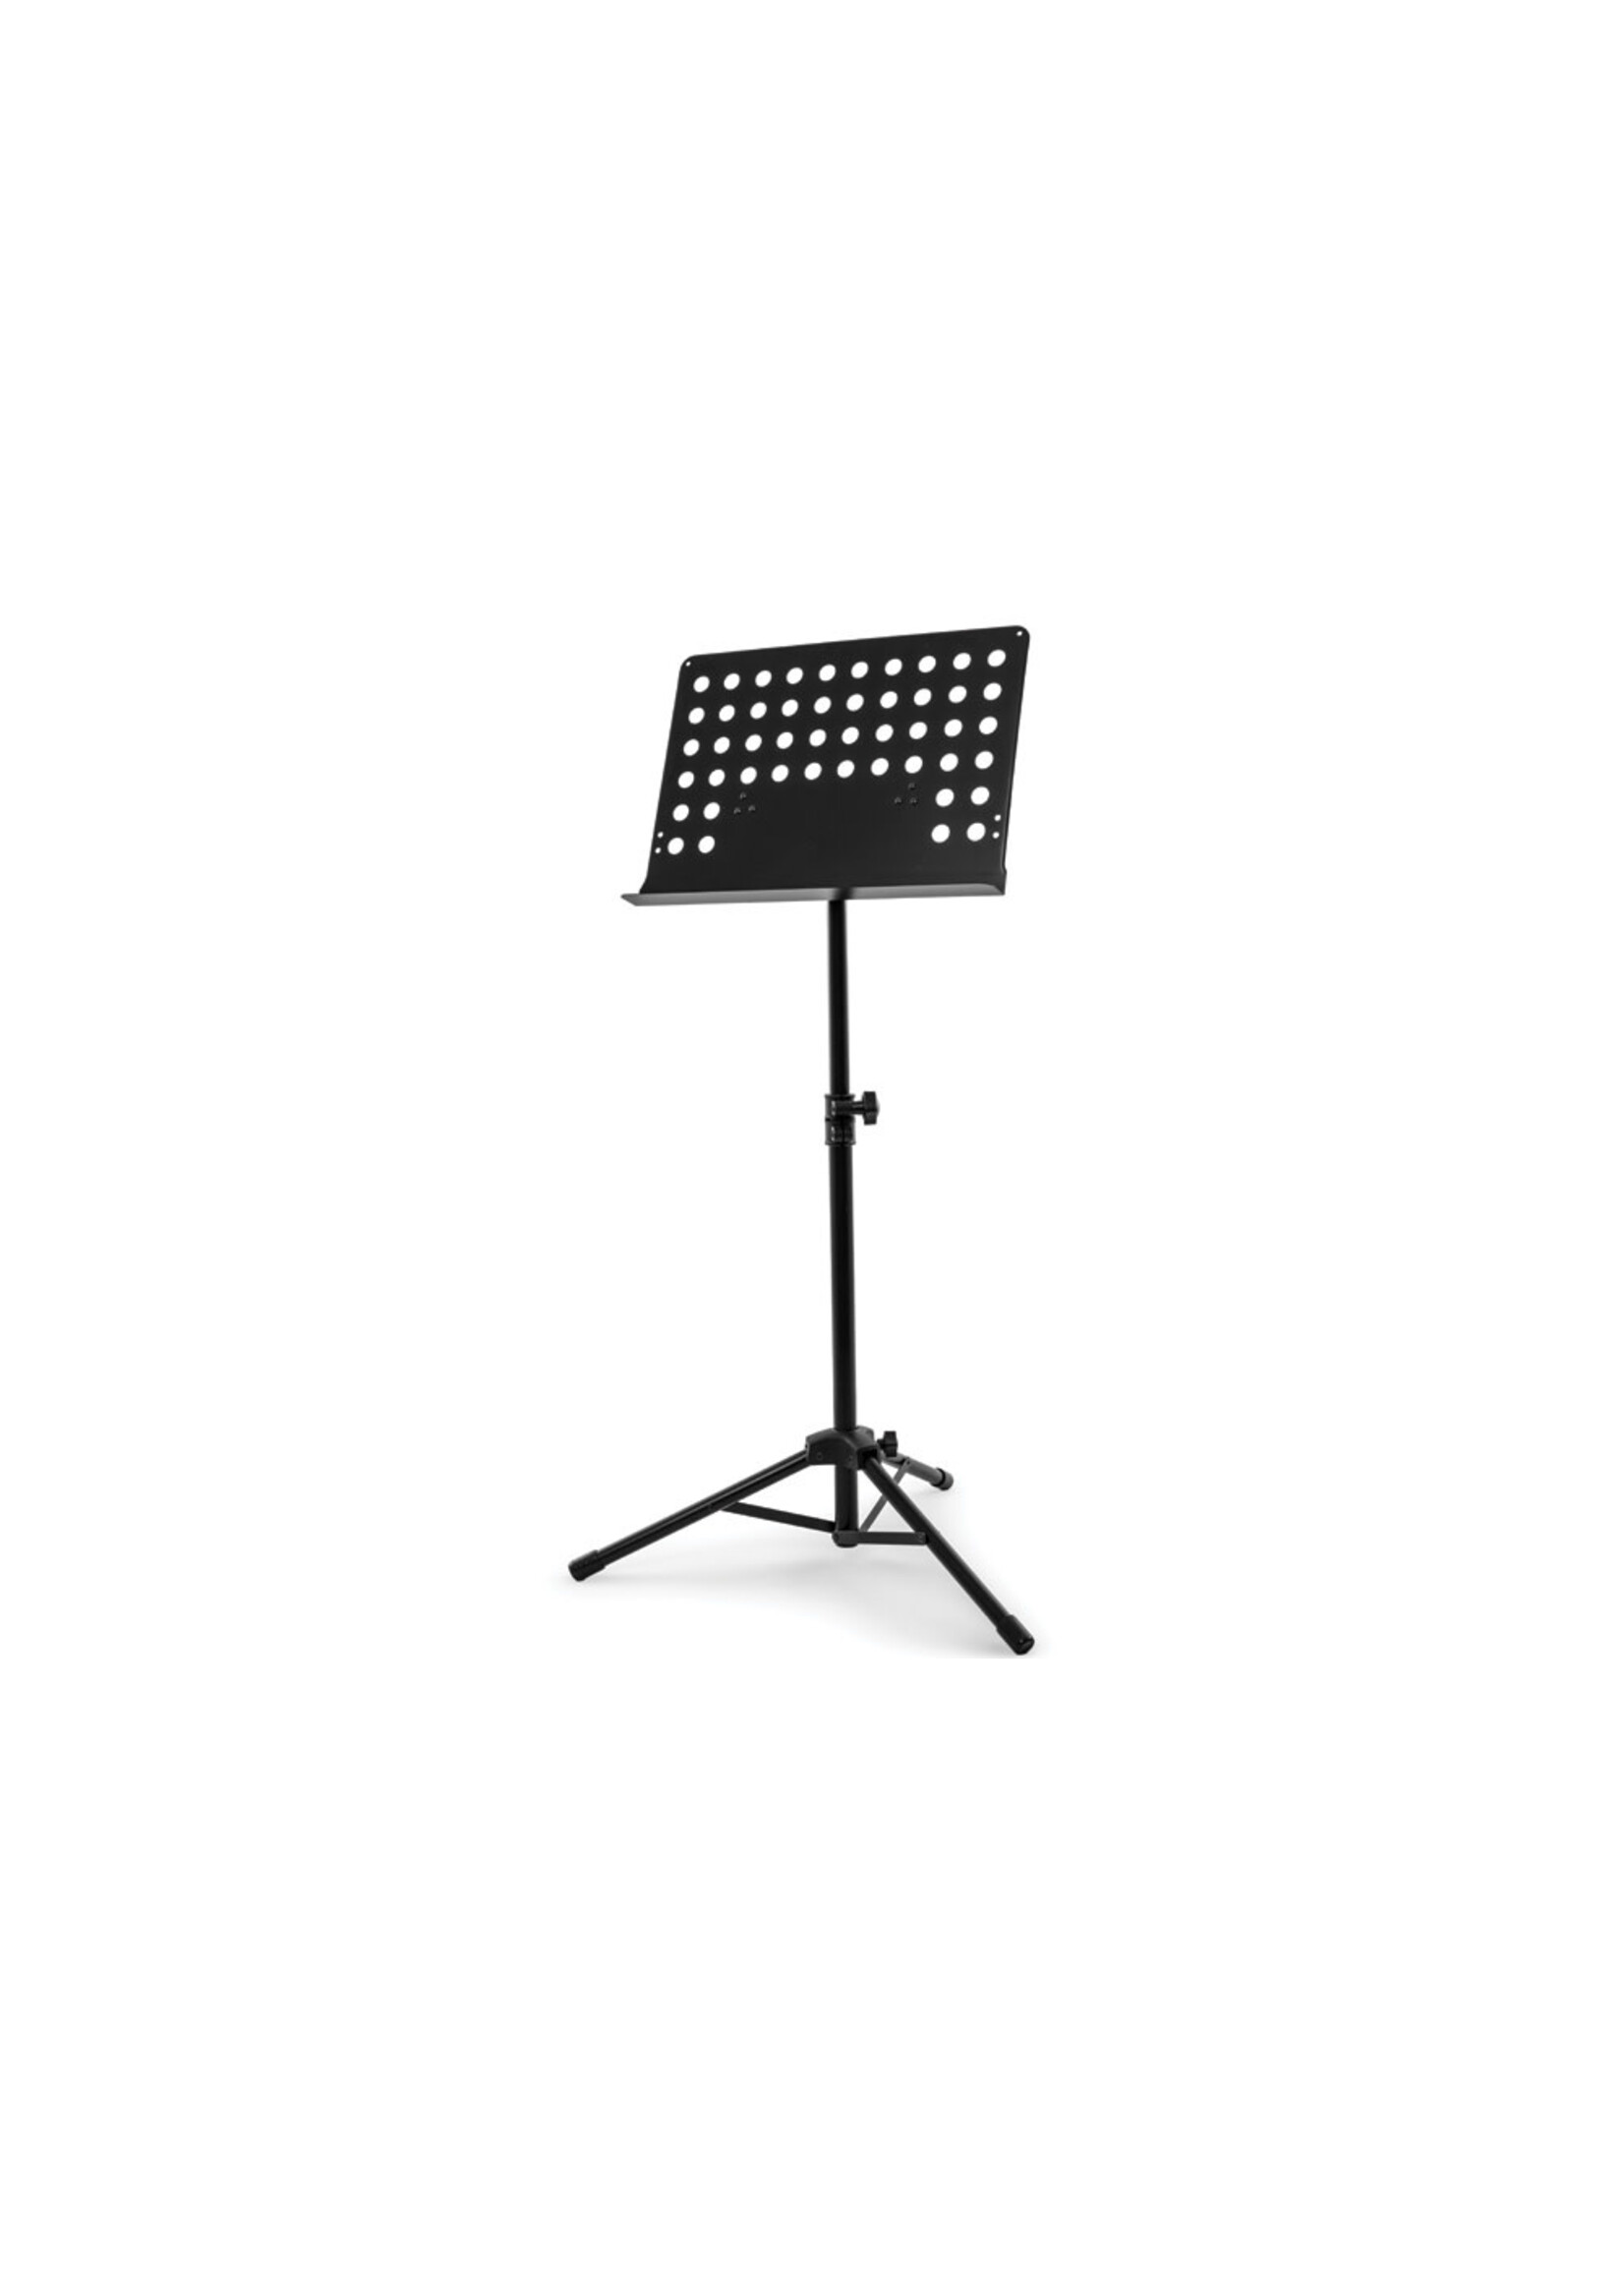 Nomad Nomad NBS-1310 Tripod Music Stand, Perforated Desk